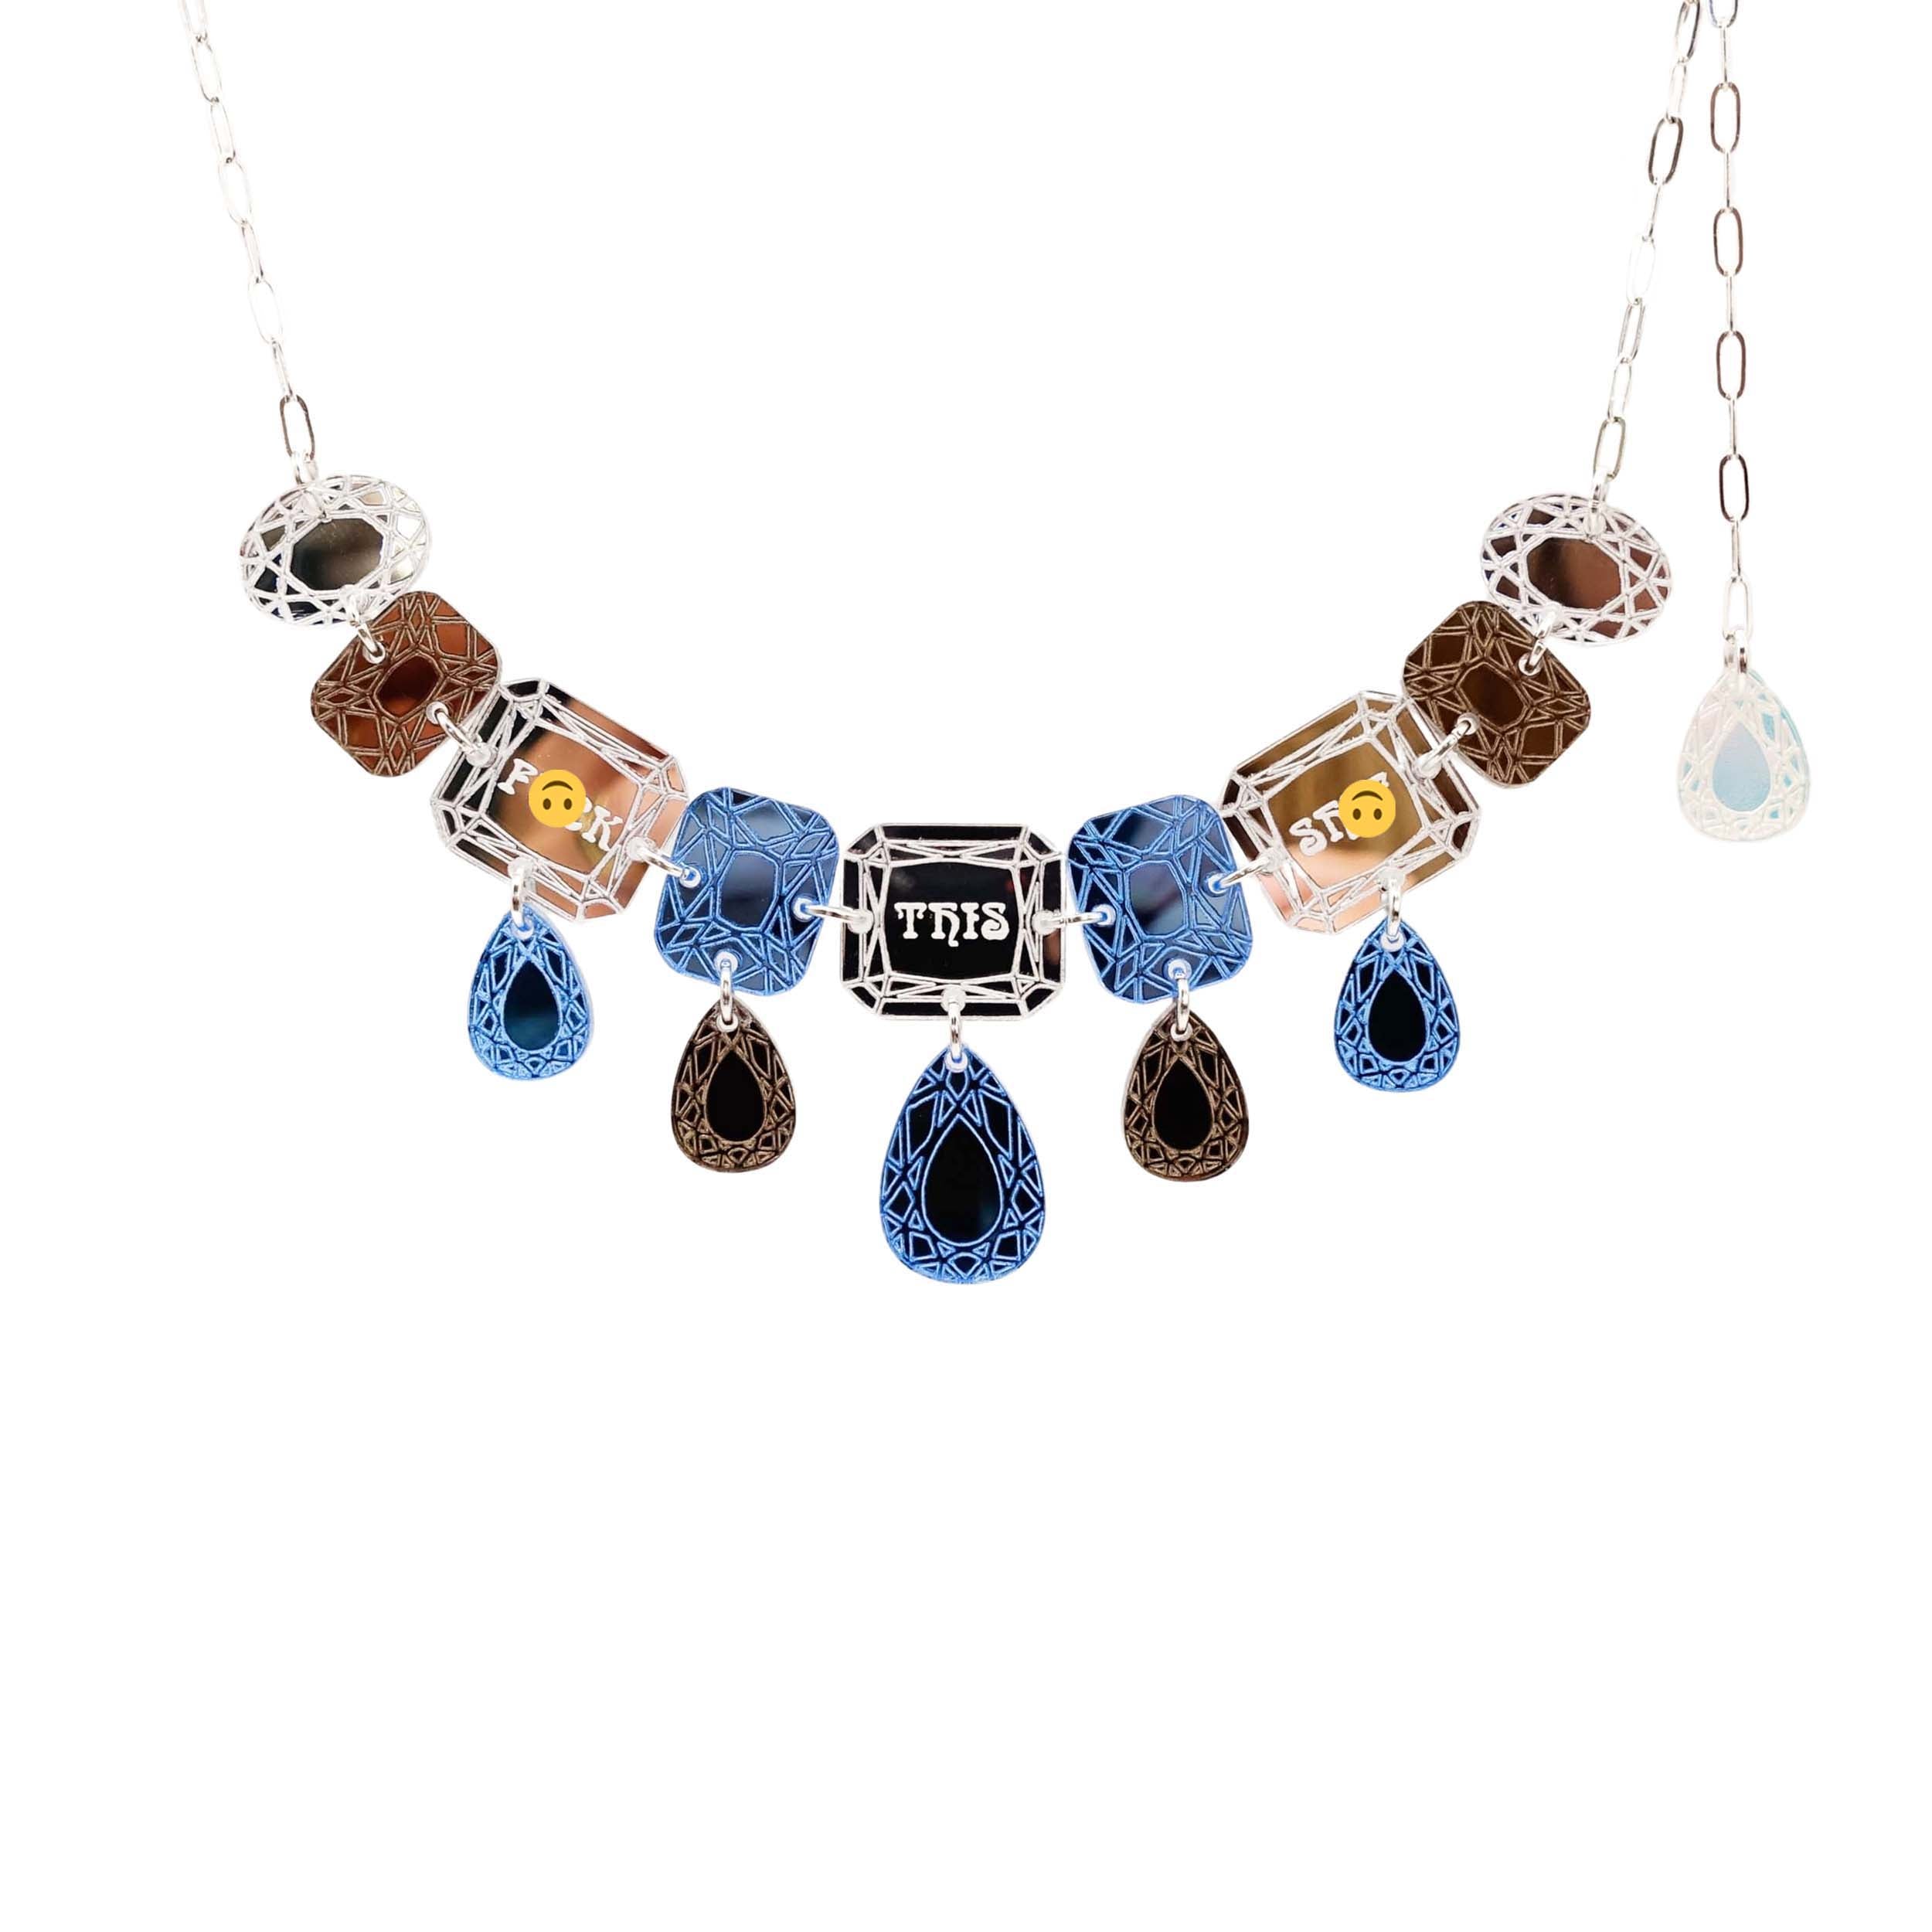 A blue silver and bronze F*ck this Sh*t jewel necklace shown hanging against a white background. 